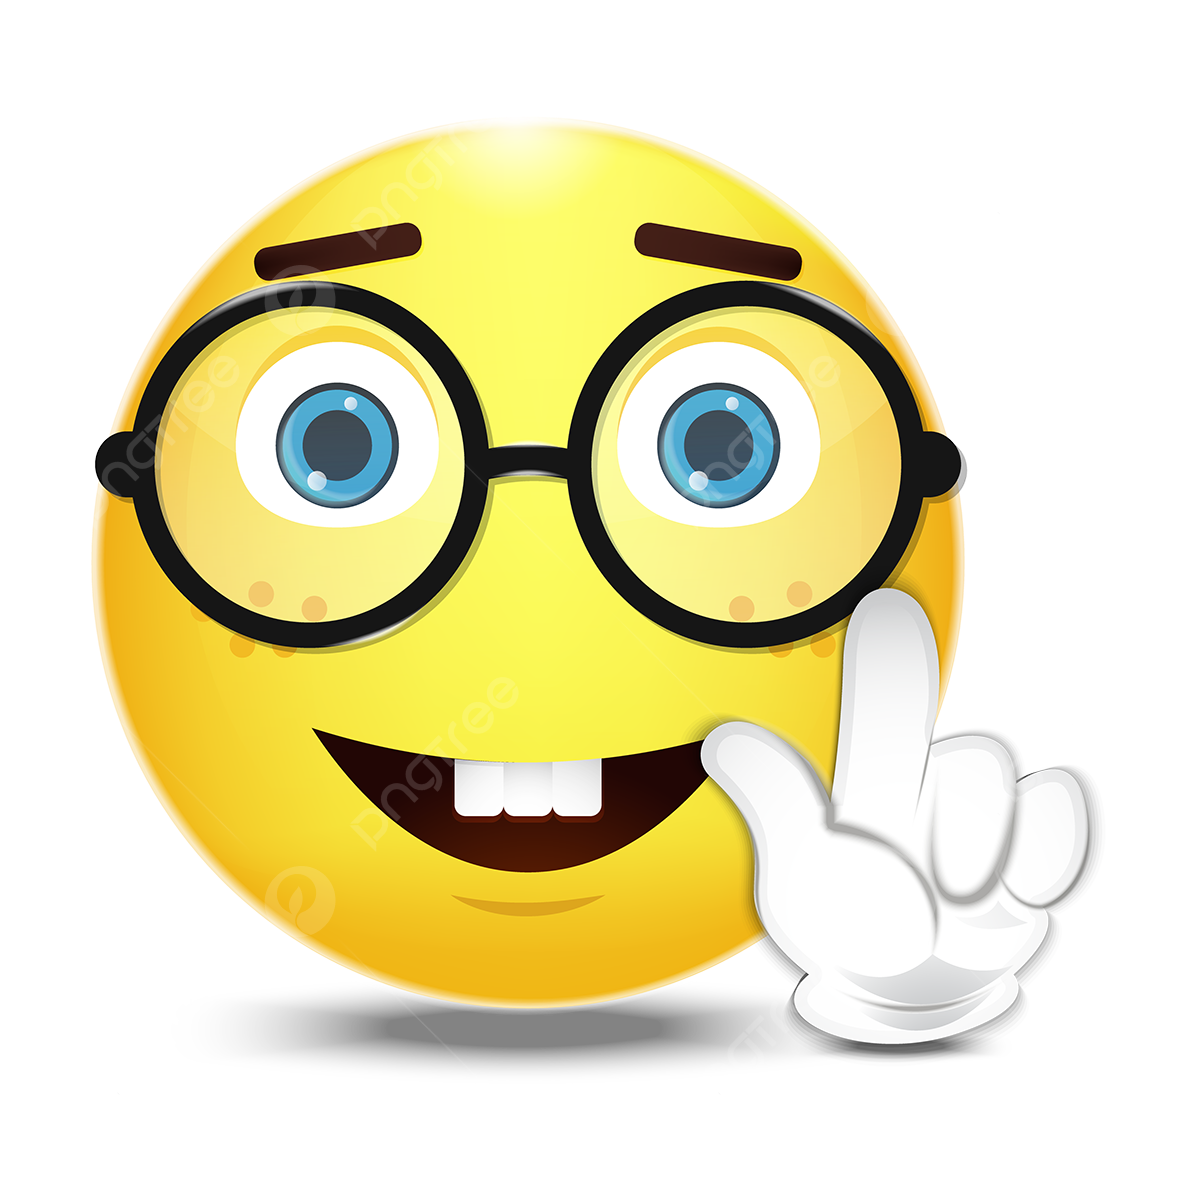 Nerd Emoji PNG Image - PNG All | PNG All